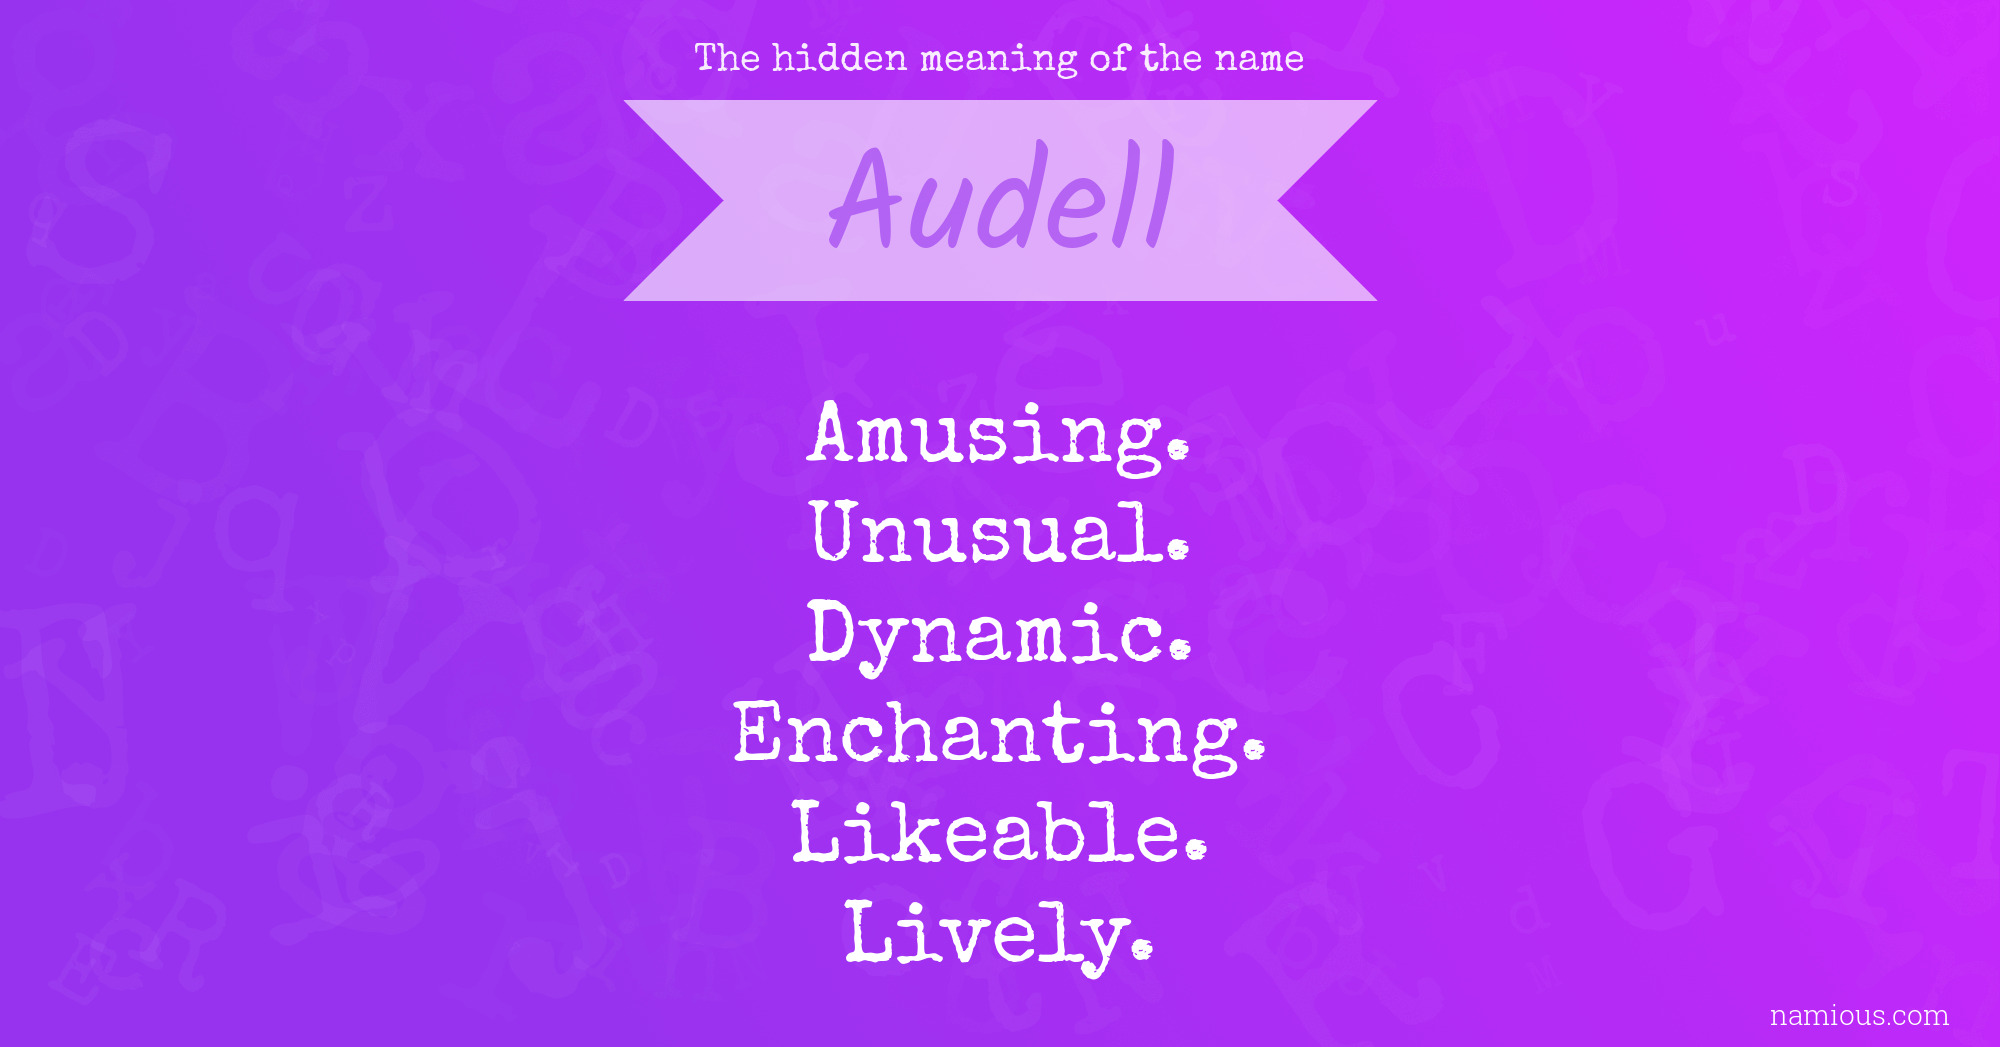 The hidden meaning of the name Audell